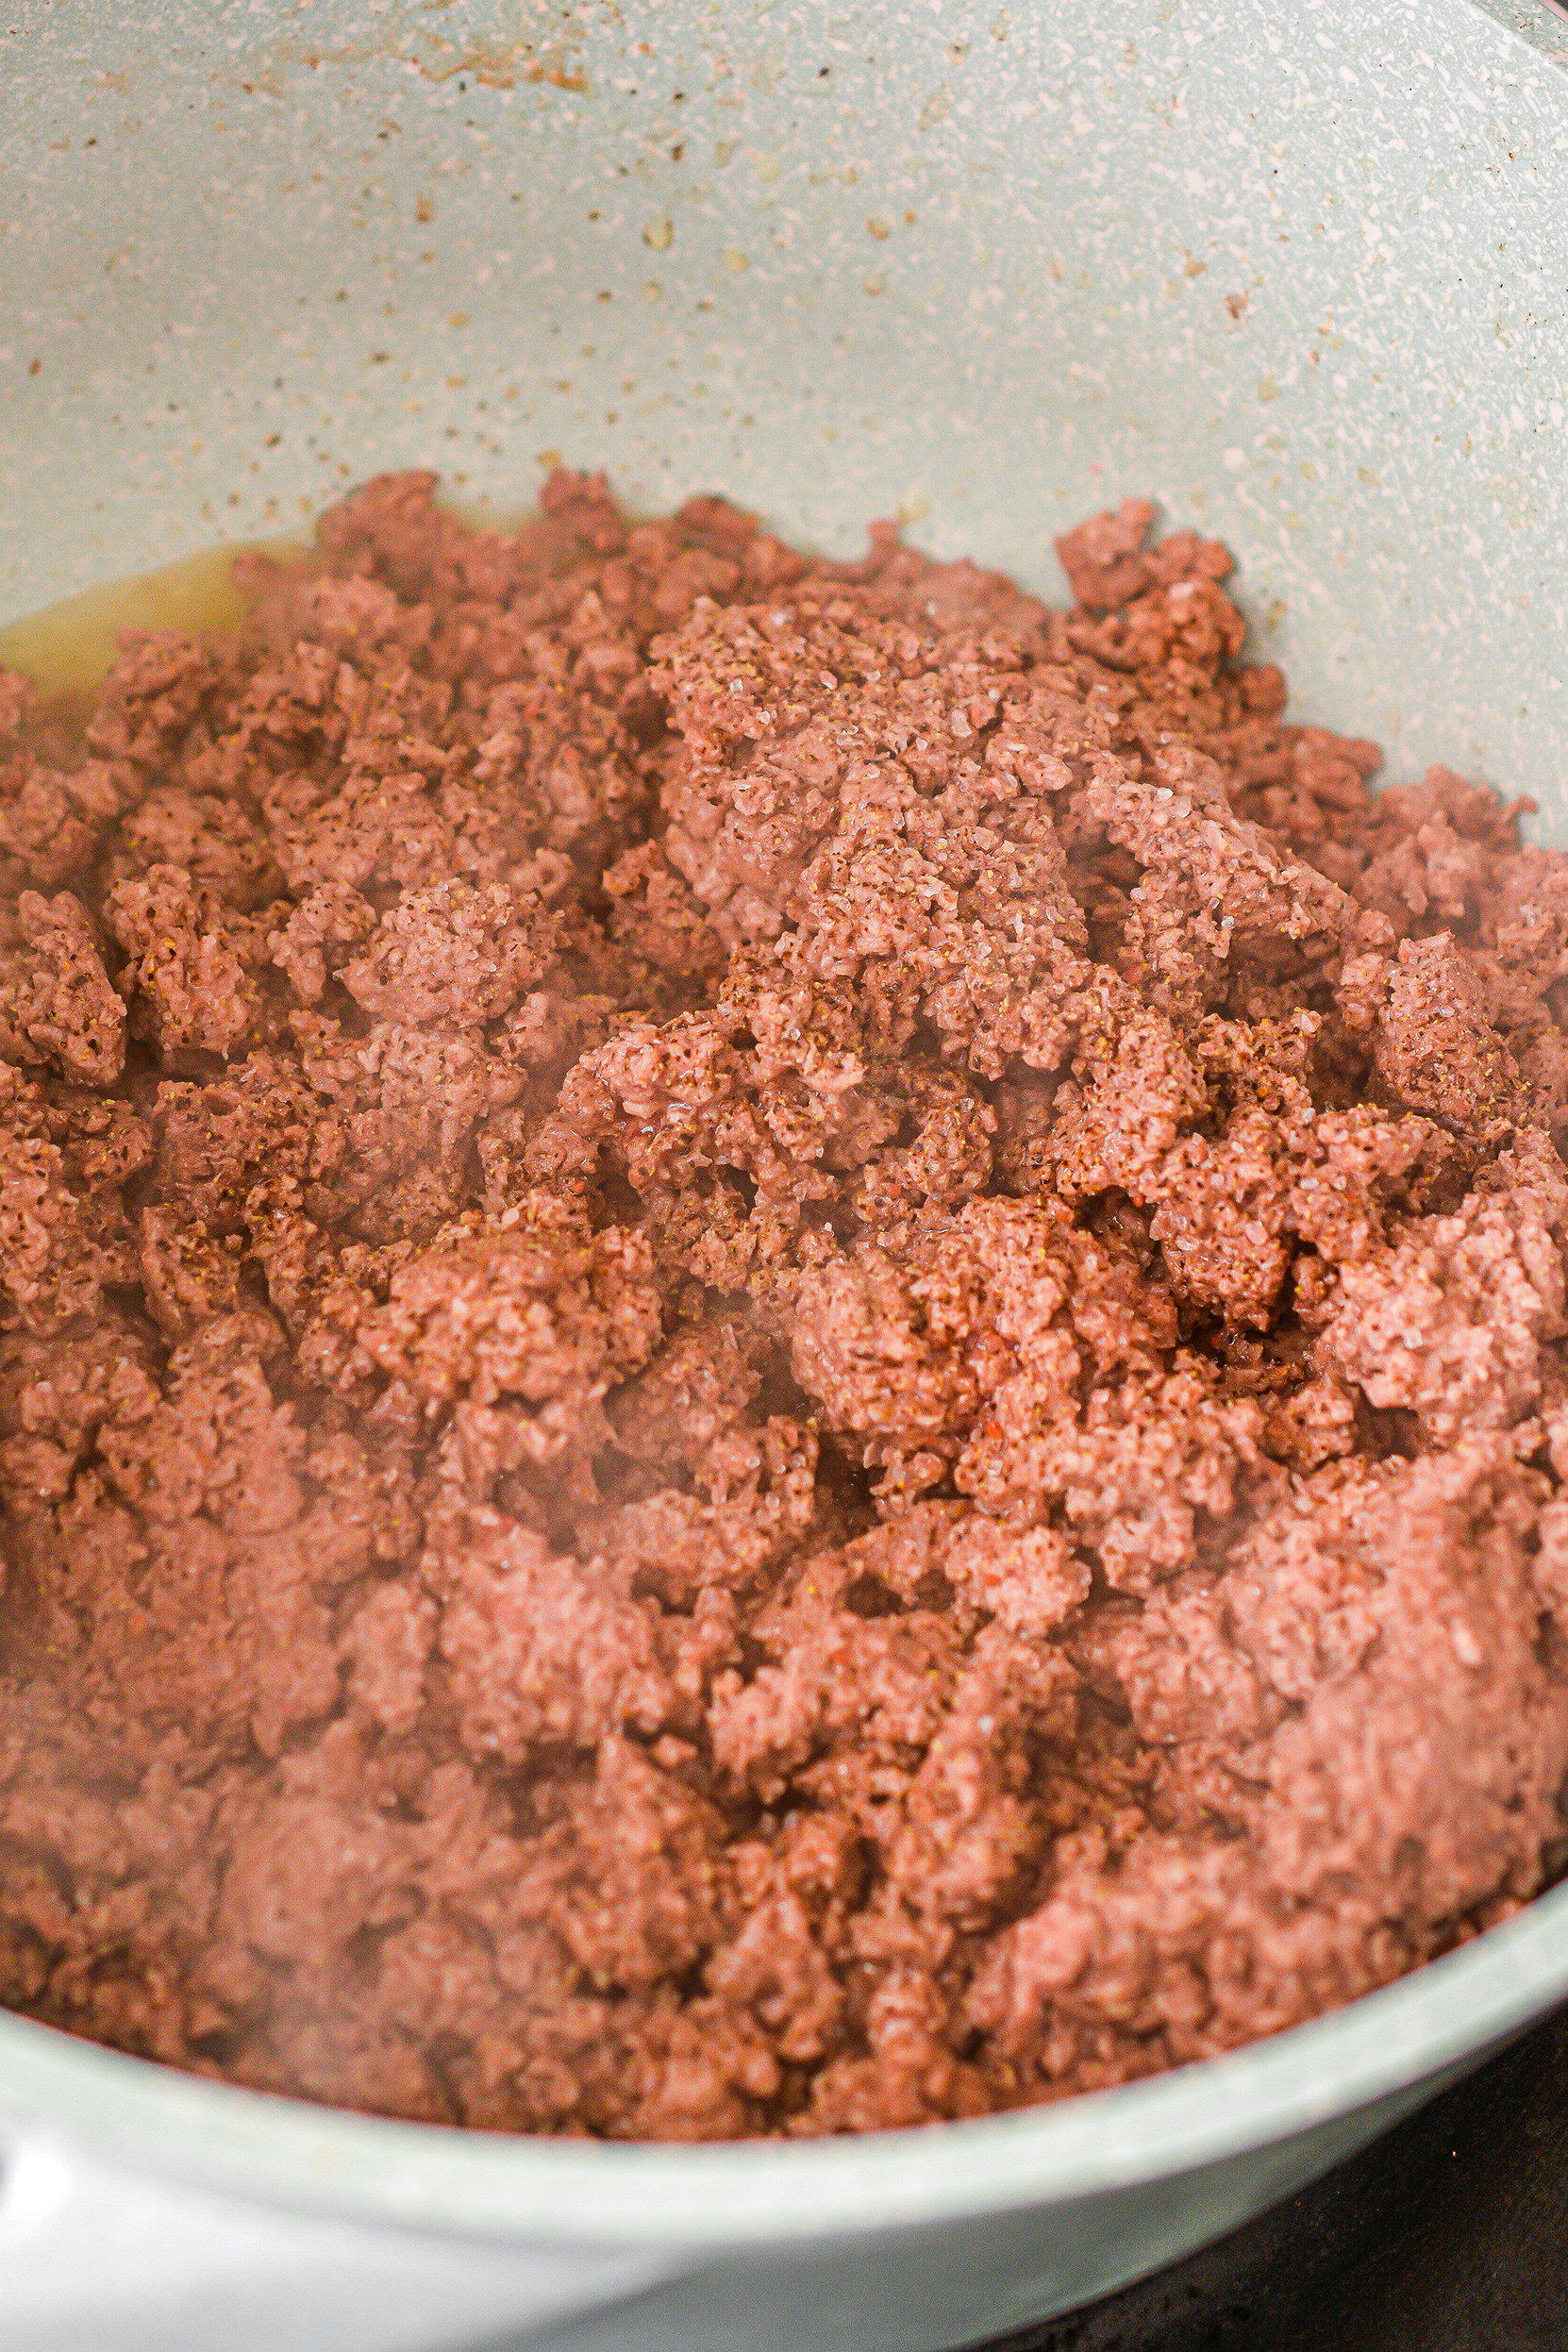 Brown the ground beef until fully cooked and drain any excess grease.